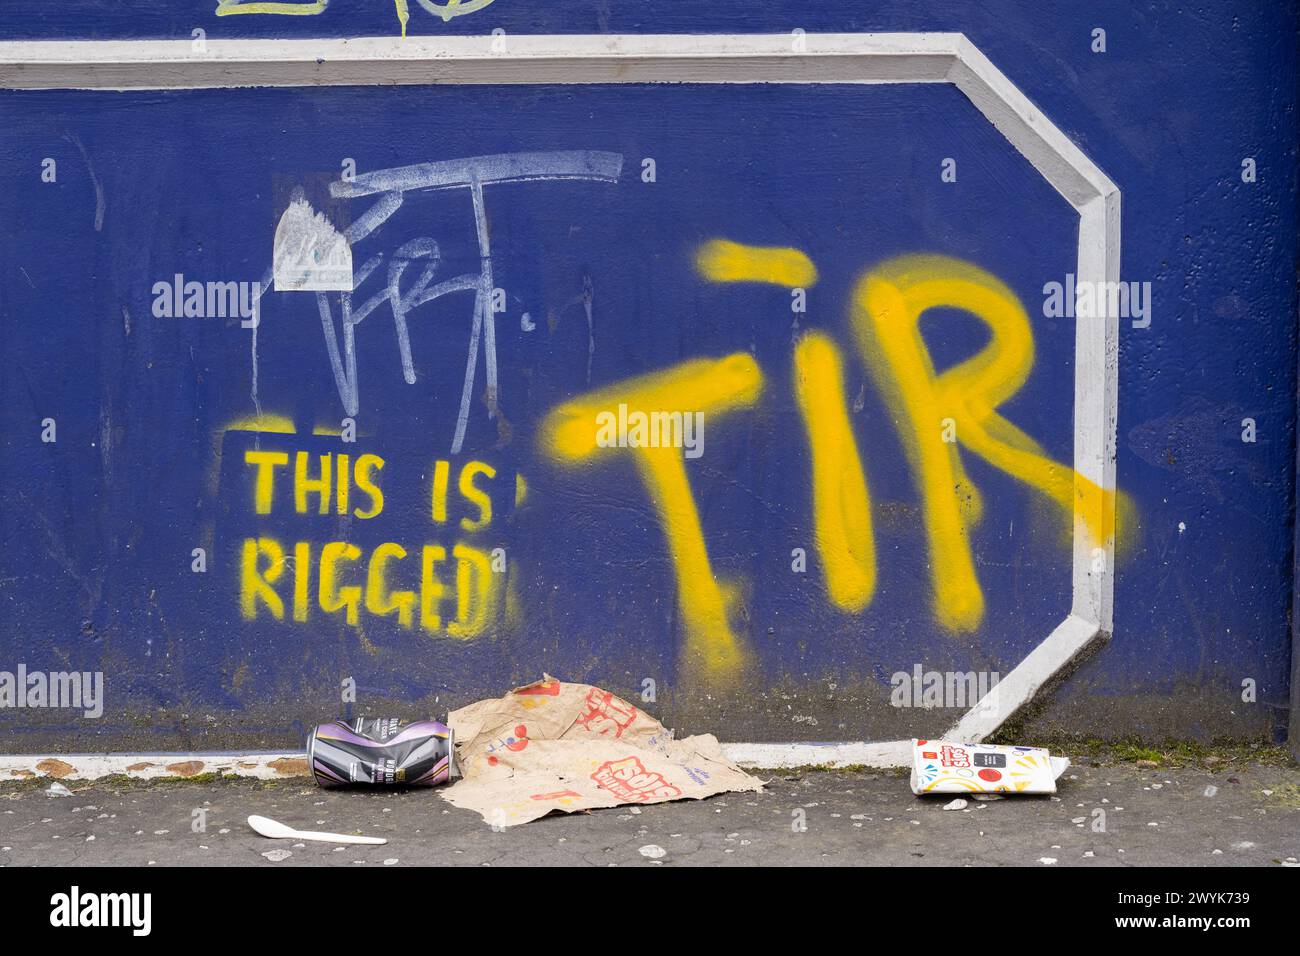 This Is Rigged protest group graffiti, Glasgow, Scotland, UK Stock Photo